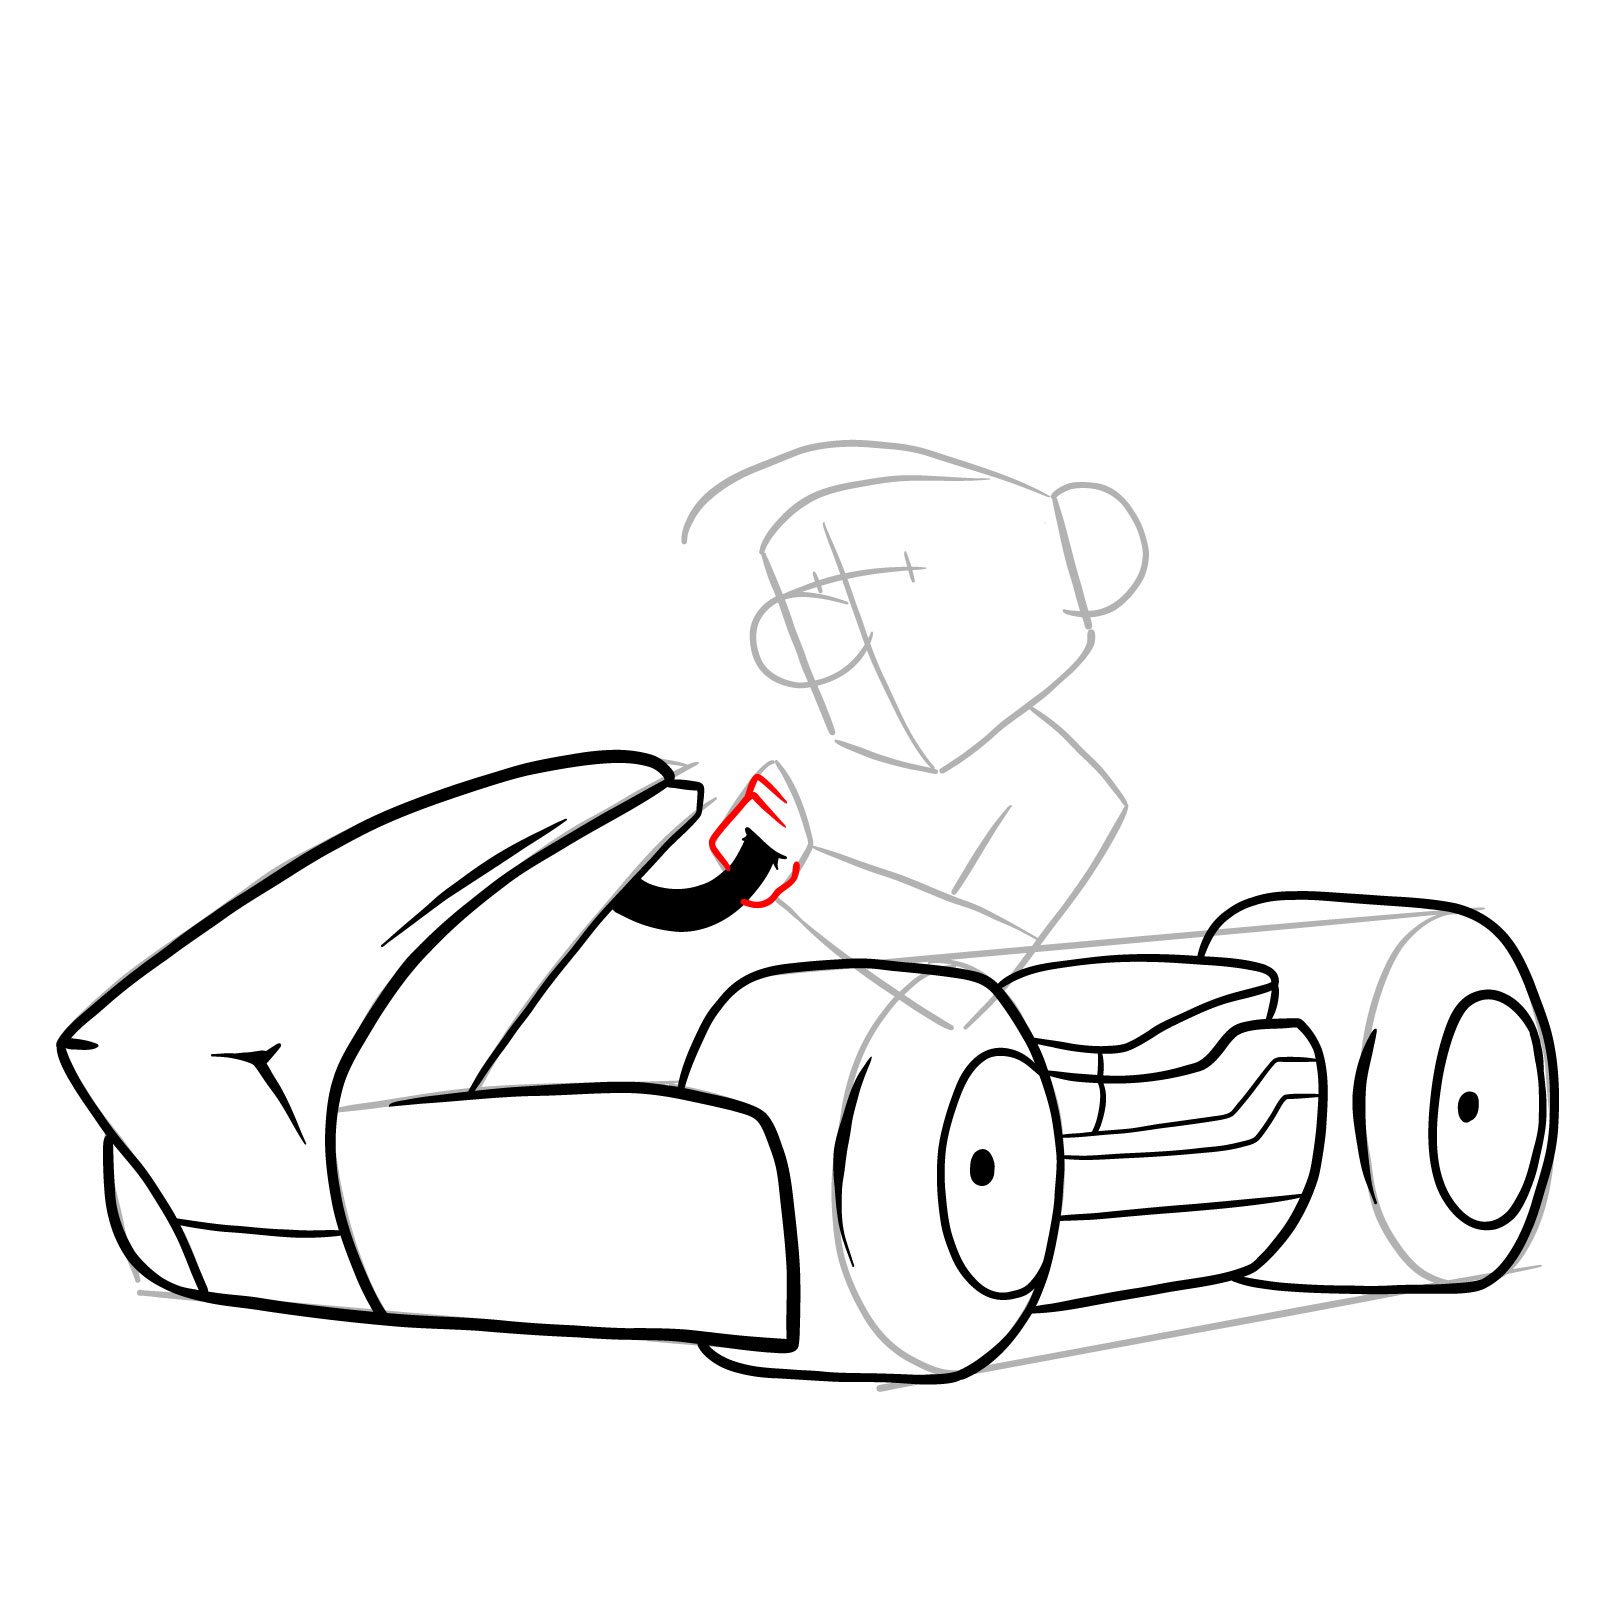 How to draw Race Traitors Mario - step 16